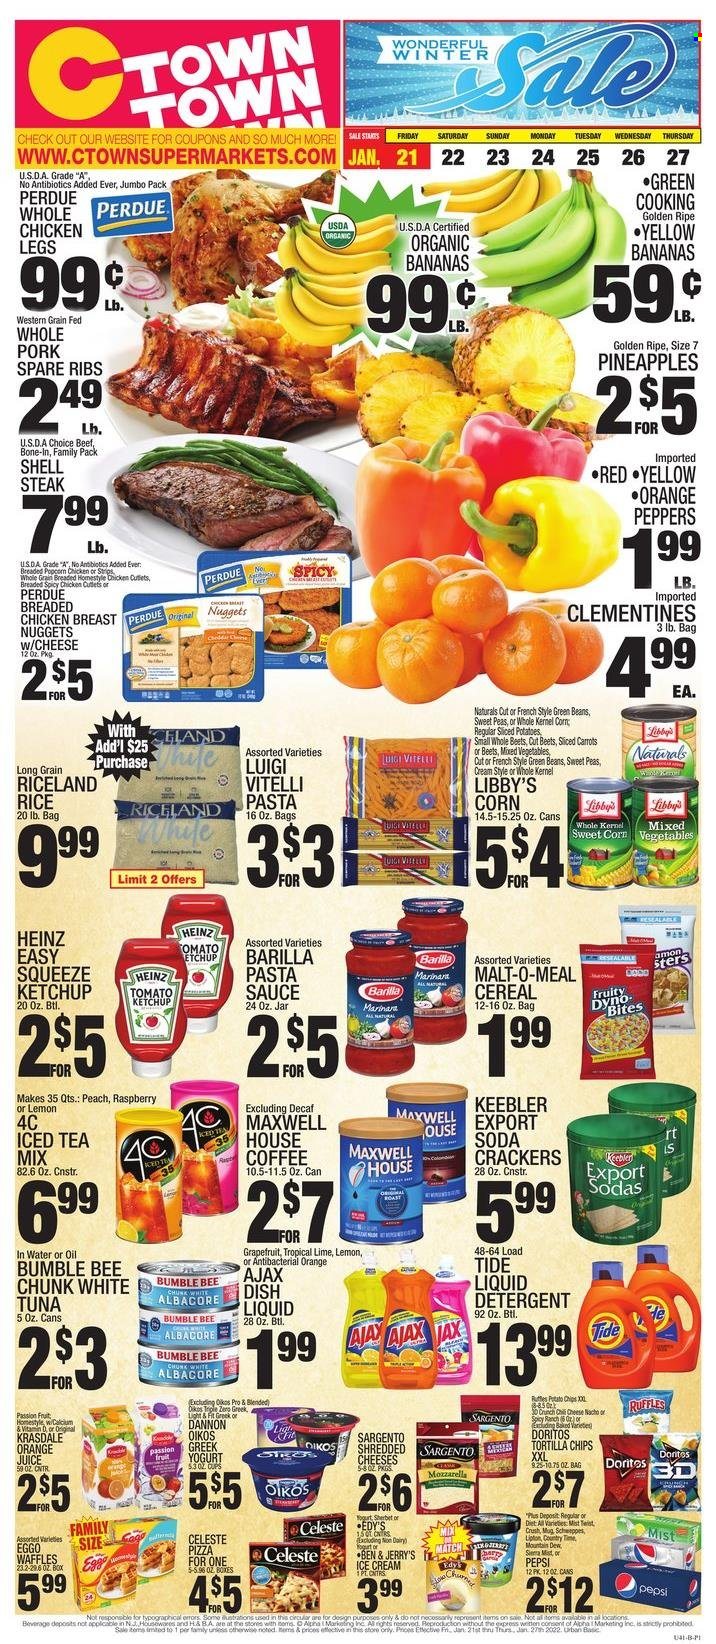 thumbnail - C-Town Flyer - 01/21/2022 - 01/27/2022 - Sales products - organic bananas, waffles, carrots, corn, green beans, potatoes, peppers, sweet corn, grapefruits, pineapple, tuna, pizza, pasta sauce, nuggets, Bumble Bee, sauce, fried chicken, chicken nuggets, Barilla, Perdue®, Sargento, greek yoghurt, yoghurt, Oikos, Dannon, ice cream, Ben & Jerry's, mixed vegetables, Celeste, crackers, Keebler, Doritos, tortilla chips, chips, Heinz, cereals, rice, ketchup, Mountain Dew, Pepsi, orange juice, juice, Lipton, ice tea, soda, Maxwell House, coffee, chicken legs, beef meat, steak, sirloin steak, pork meat, pork ribs, pork spare ribs, clementines. Page 1.